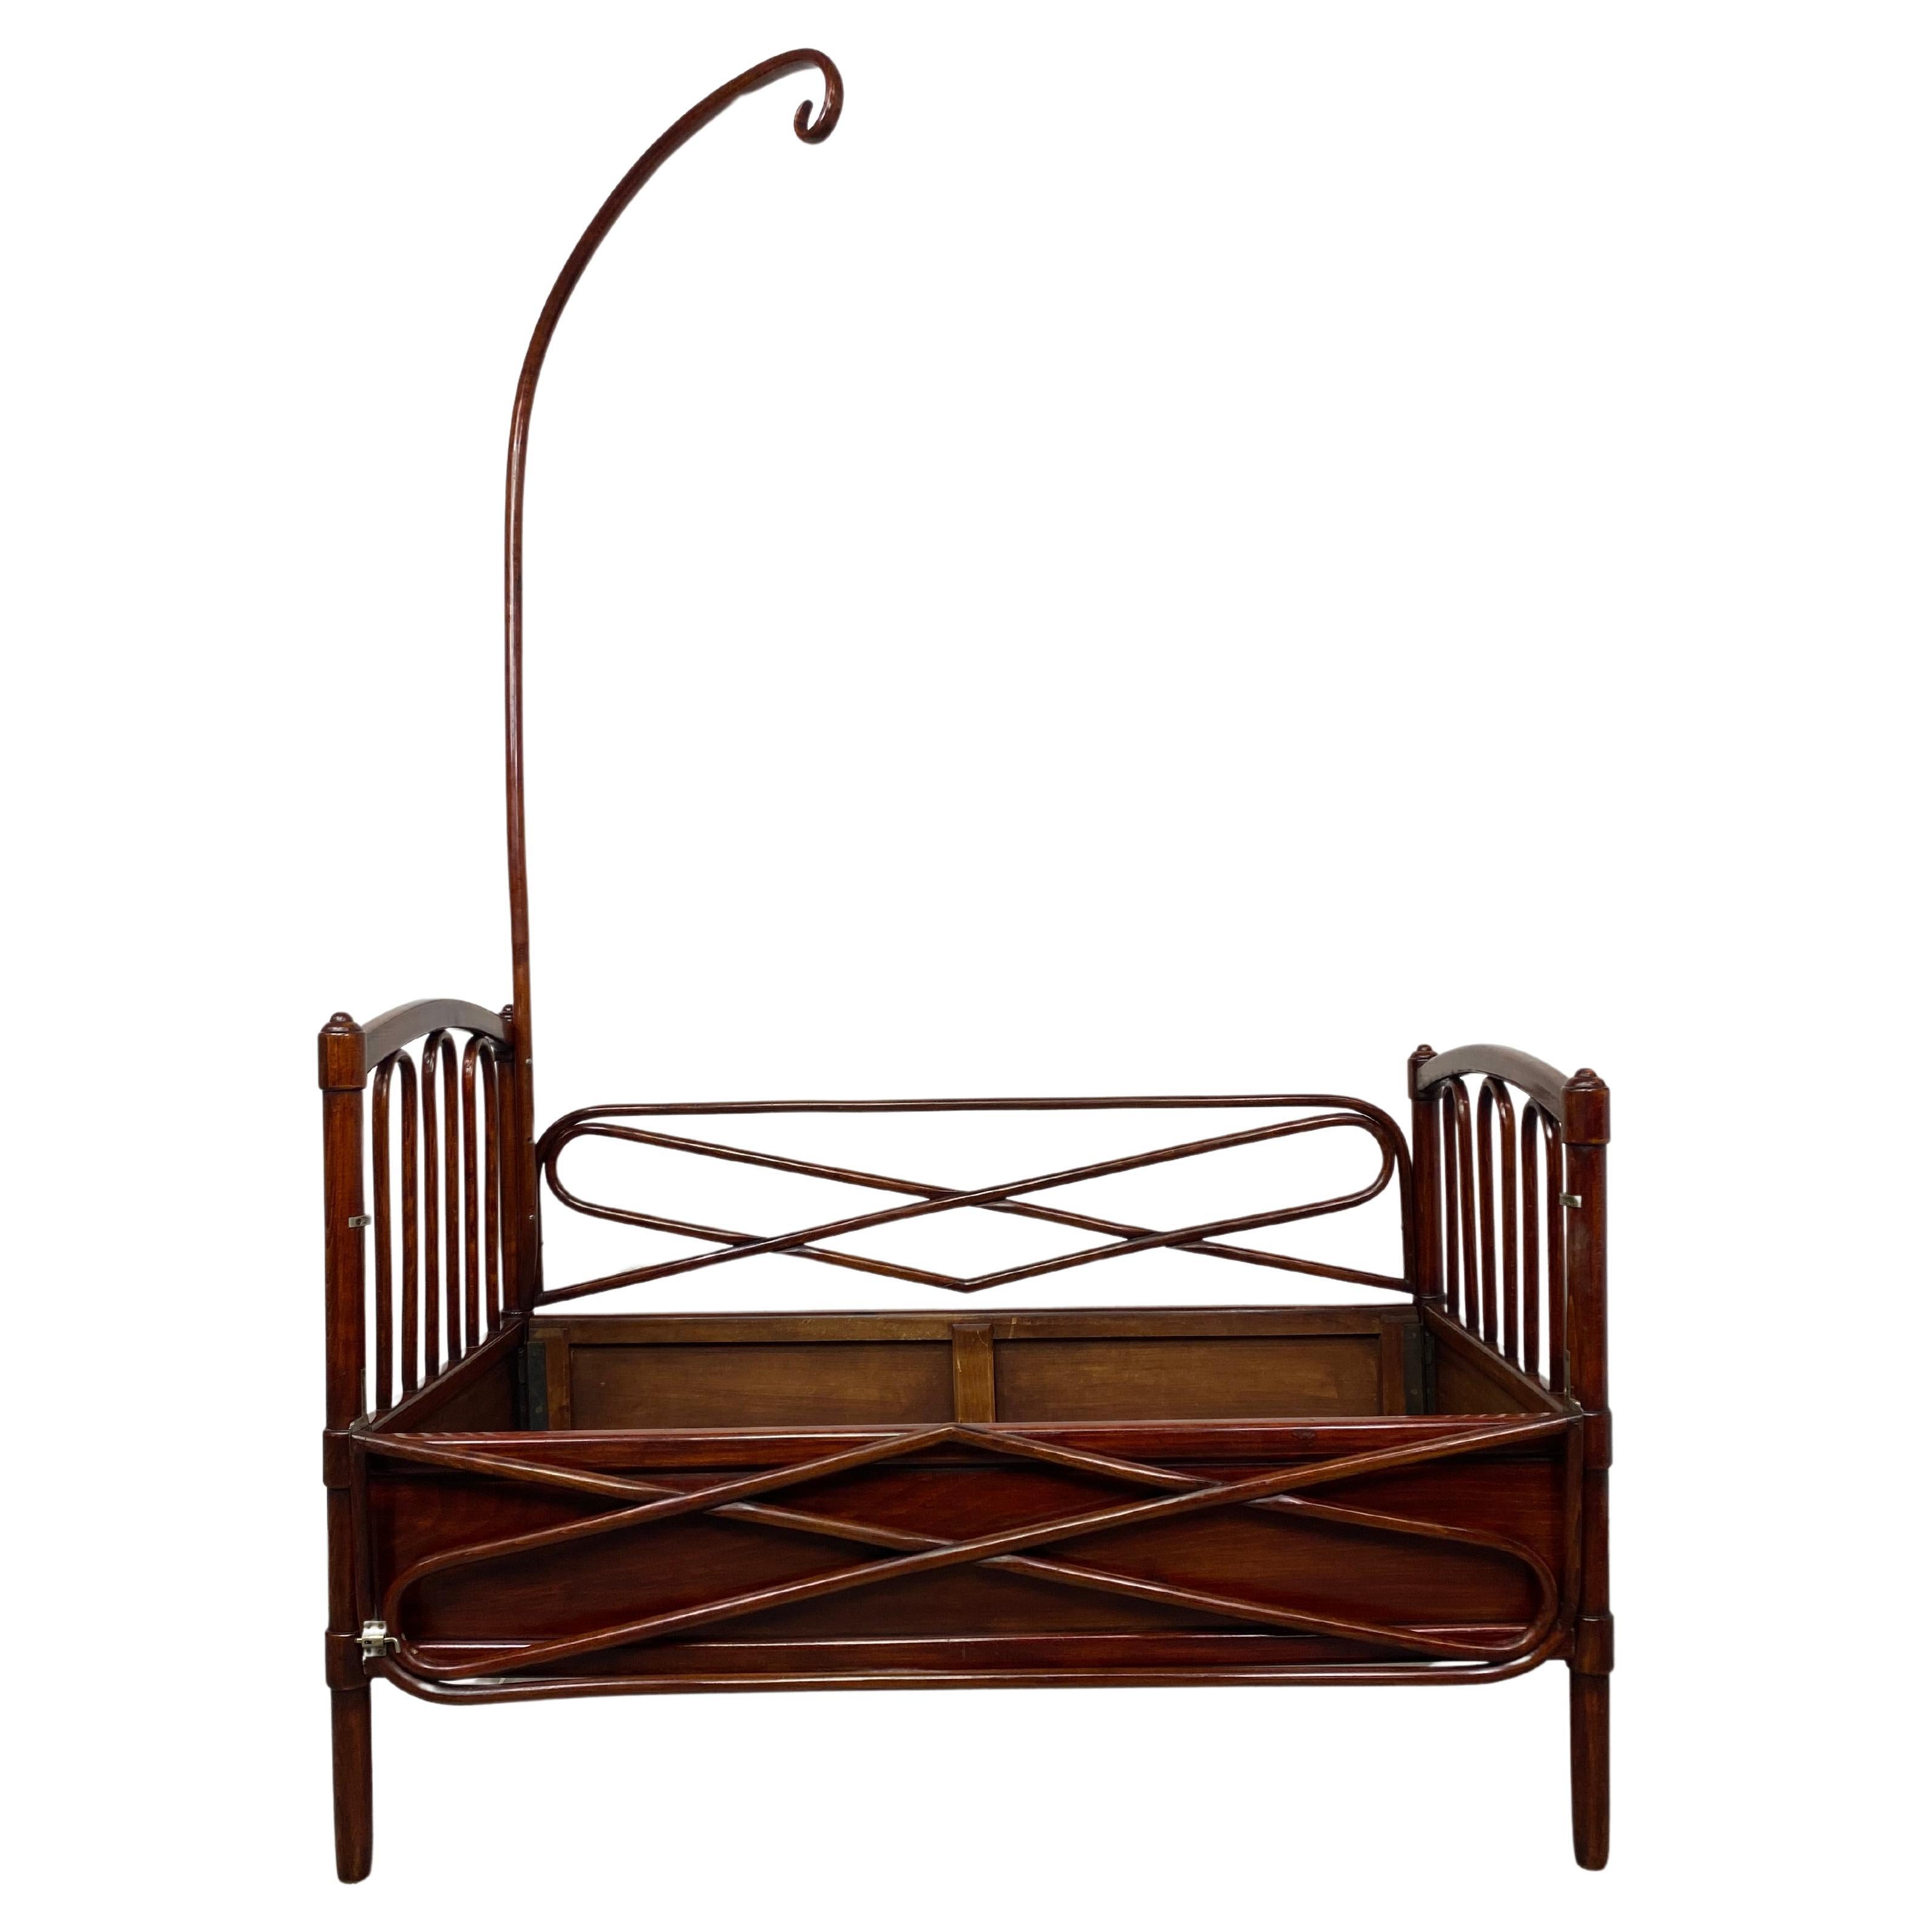 Bentwood bed no.5 for children circa 1890